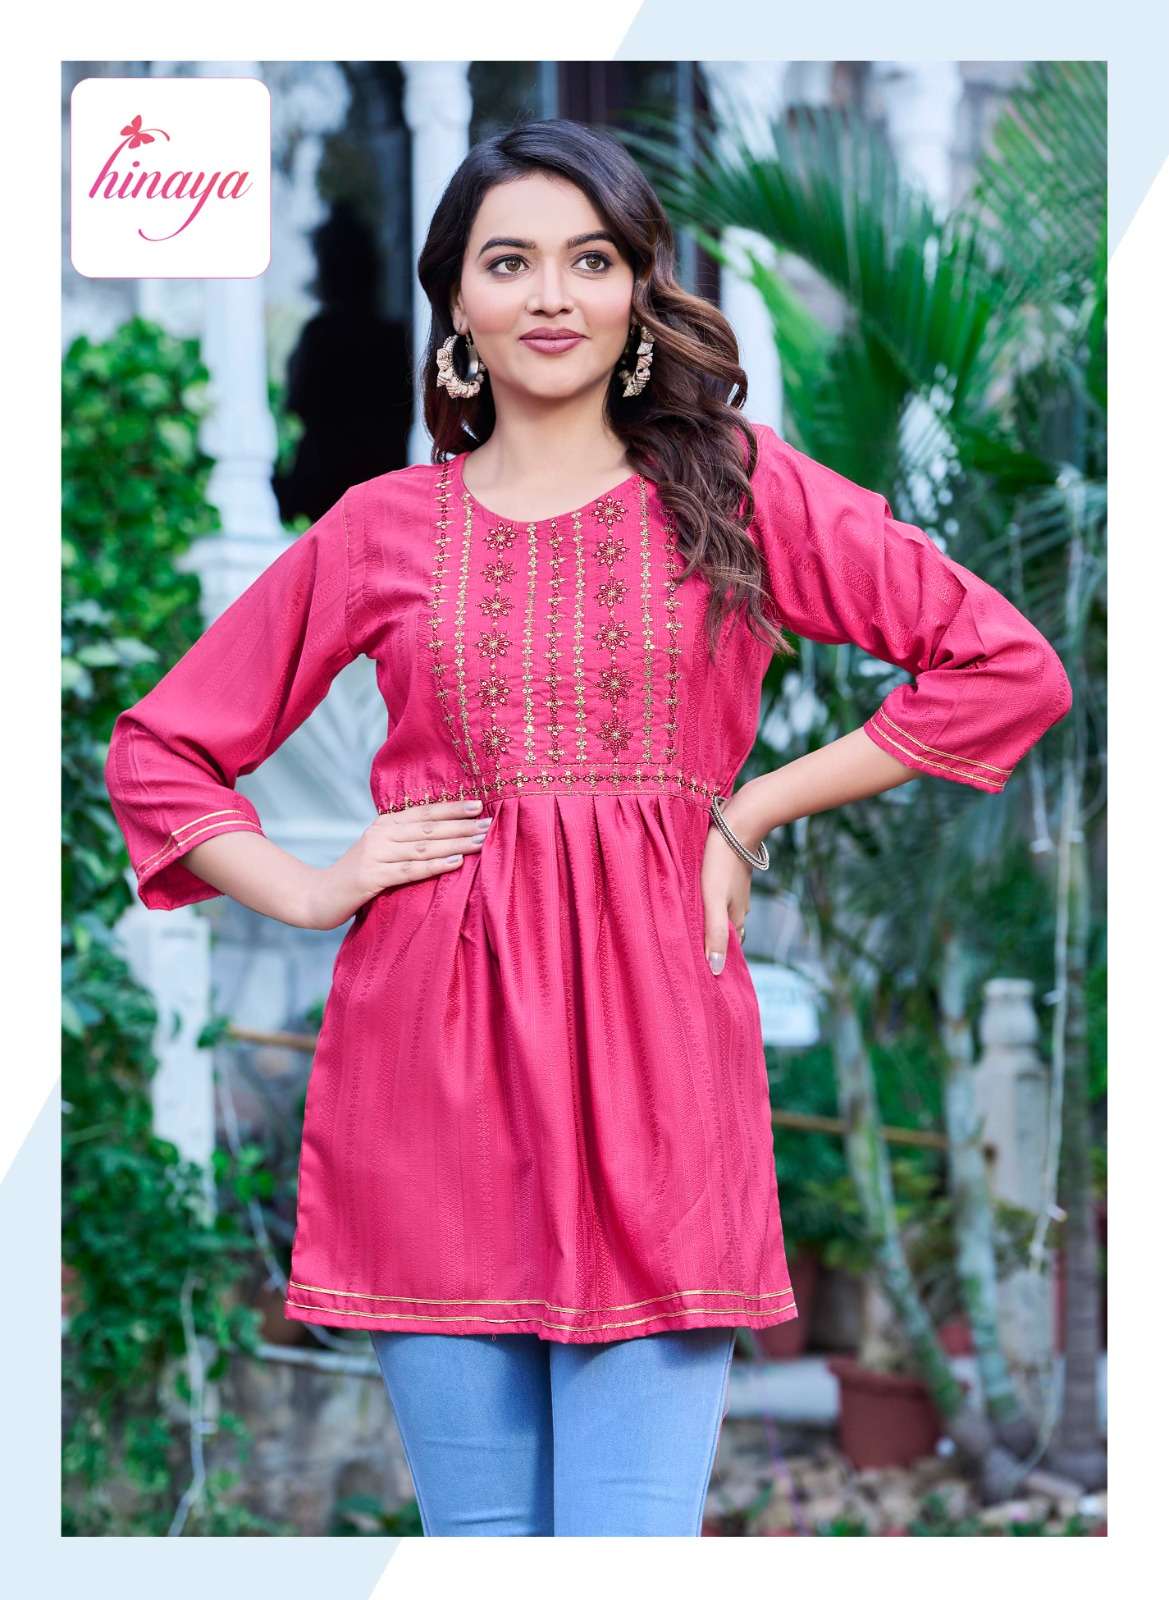 TAMANNA VOL 2 RAYON TEXTURED EMBROIDERED TOPS WITH SILAI PATTERN BY HINAYA BRAND WHOLESALER AND DEAL...